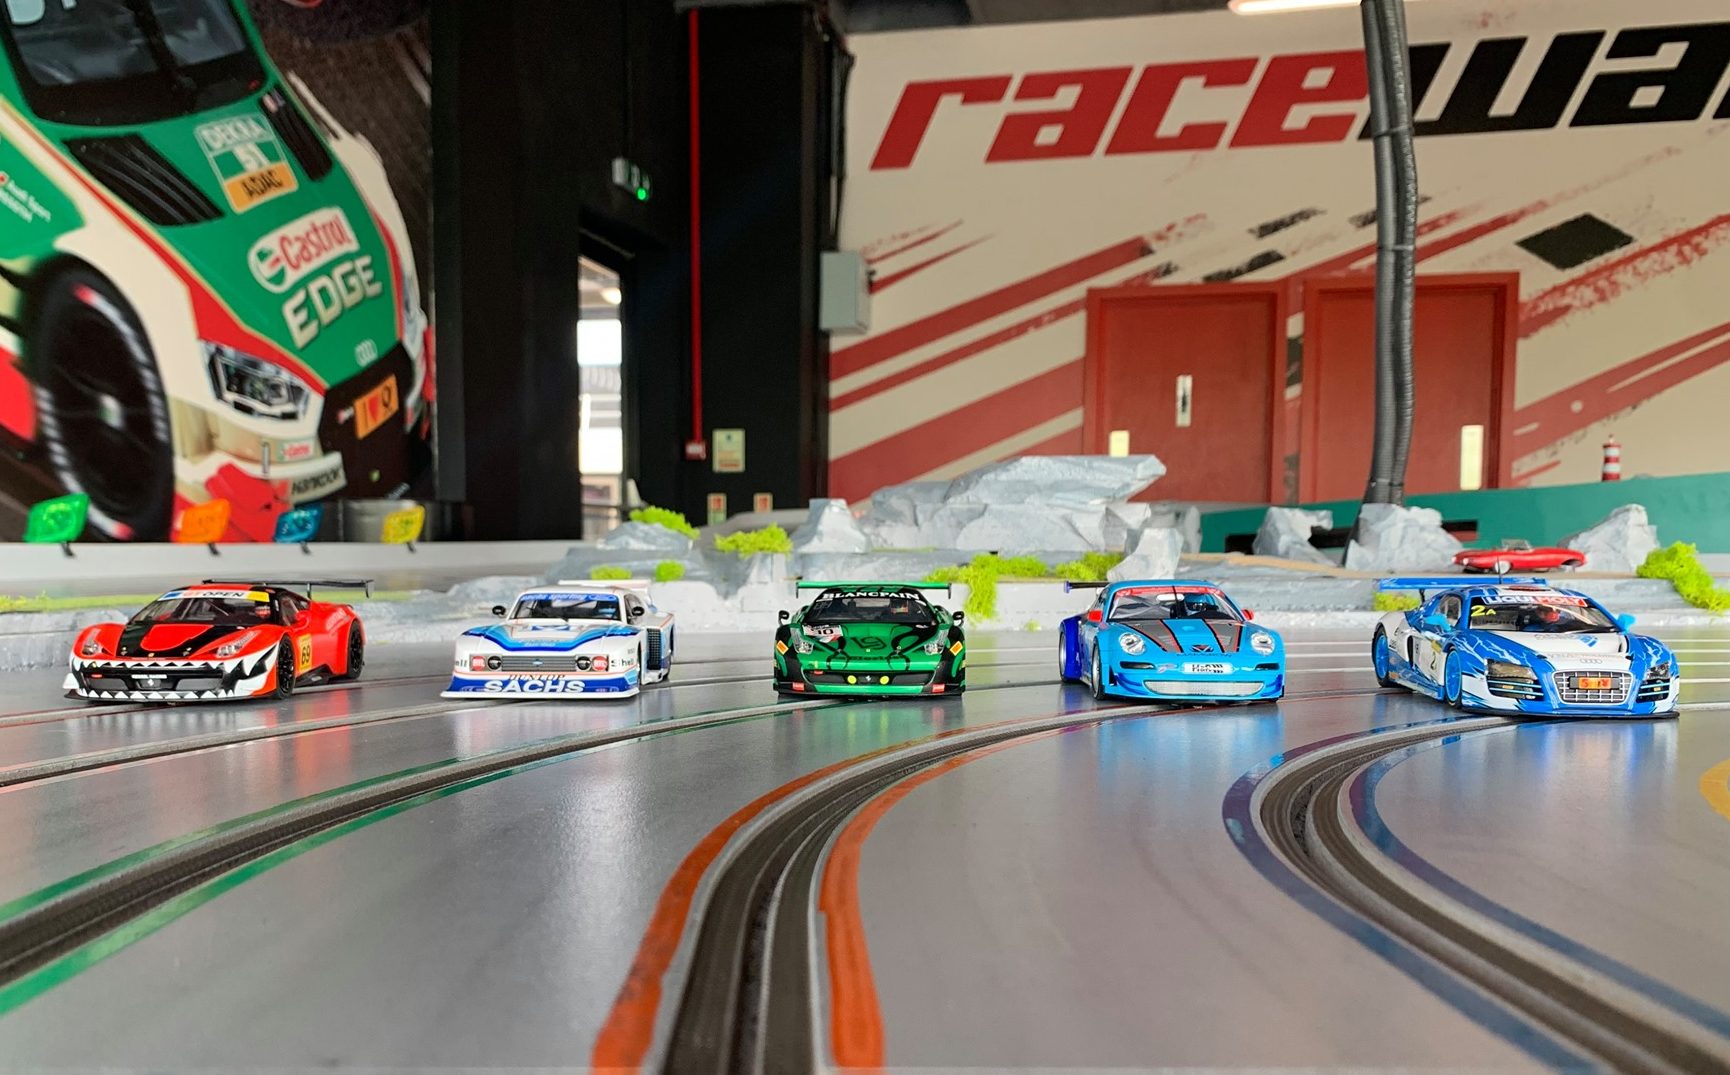 slot car racing near me clubs Racers back in the groove at hope